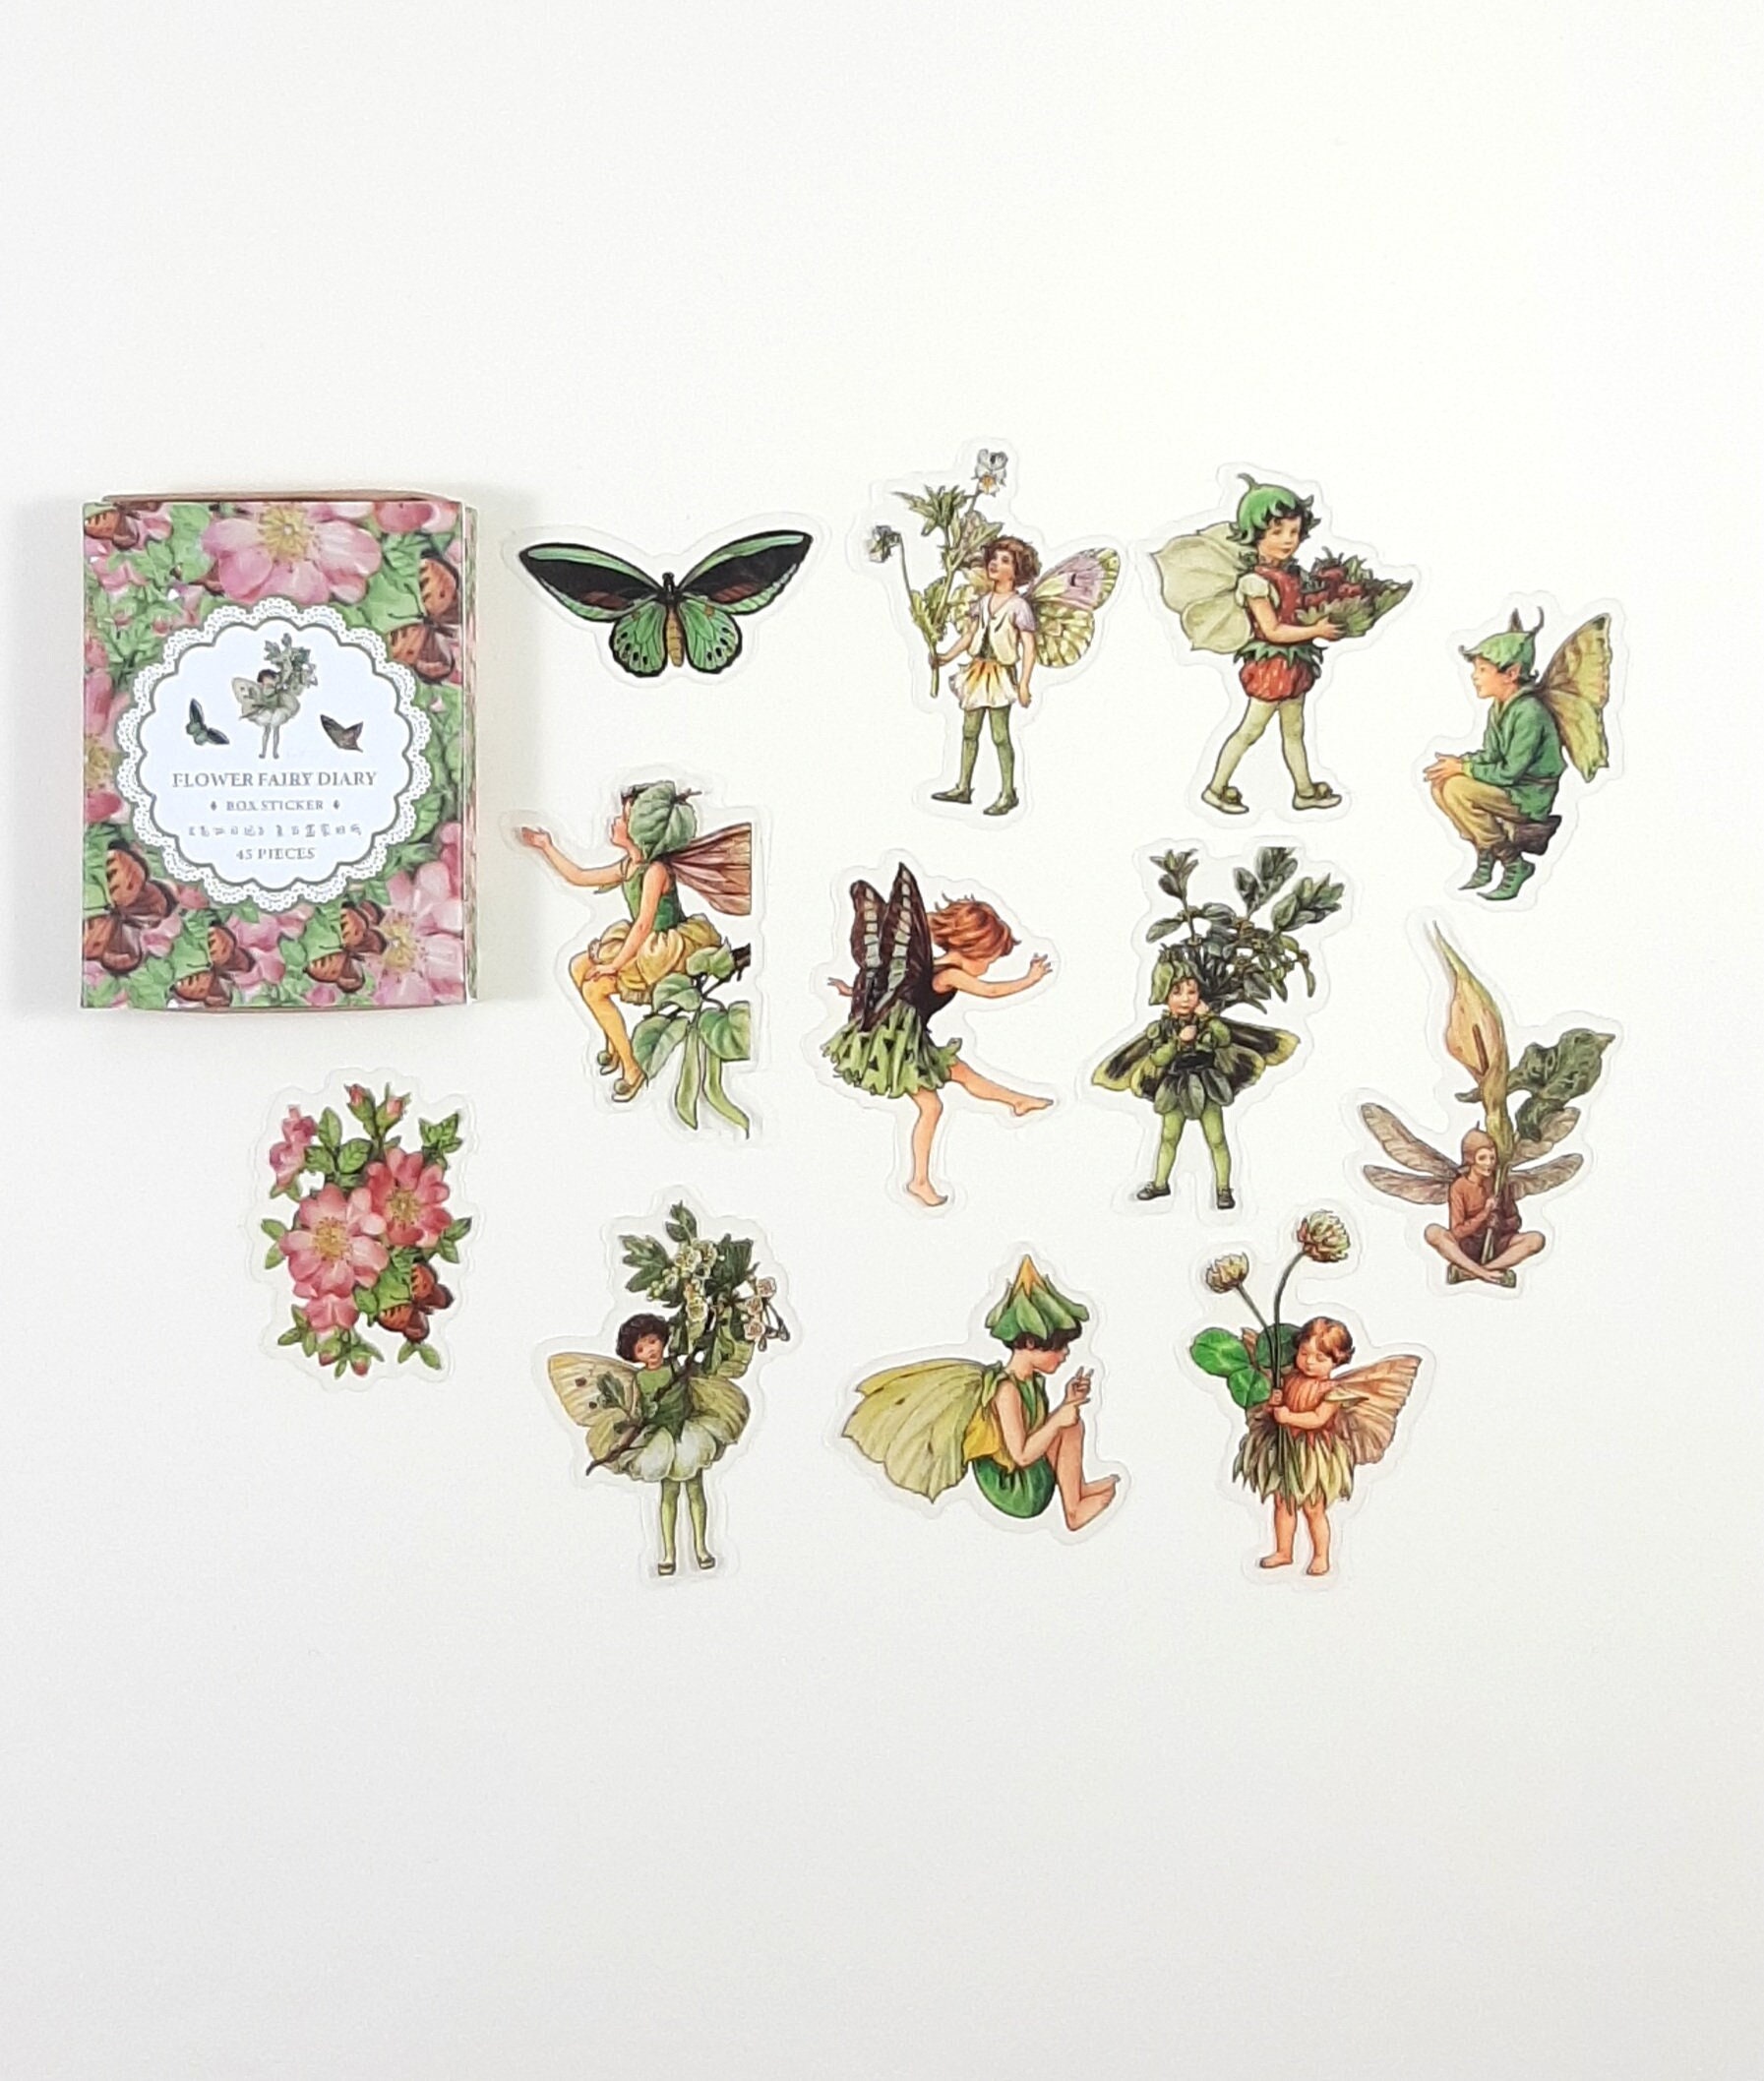 Flower Fairy Sticker Box, Pink and Green Vintage Style Fairy